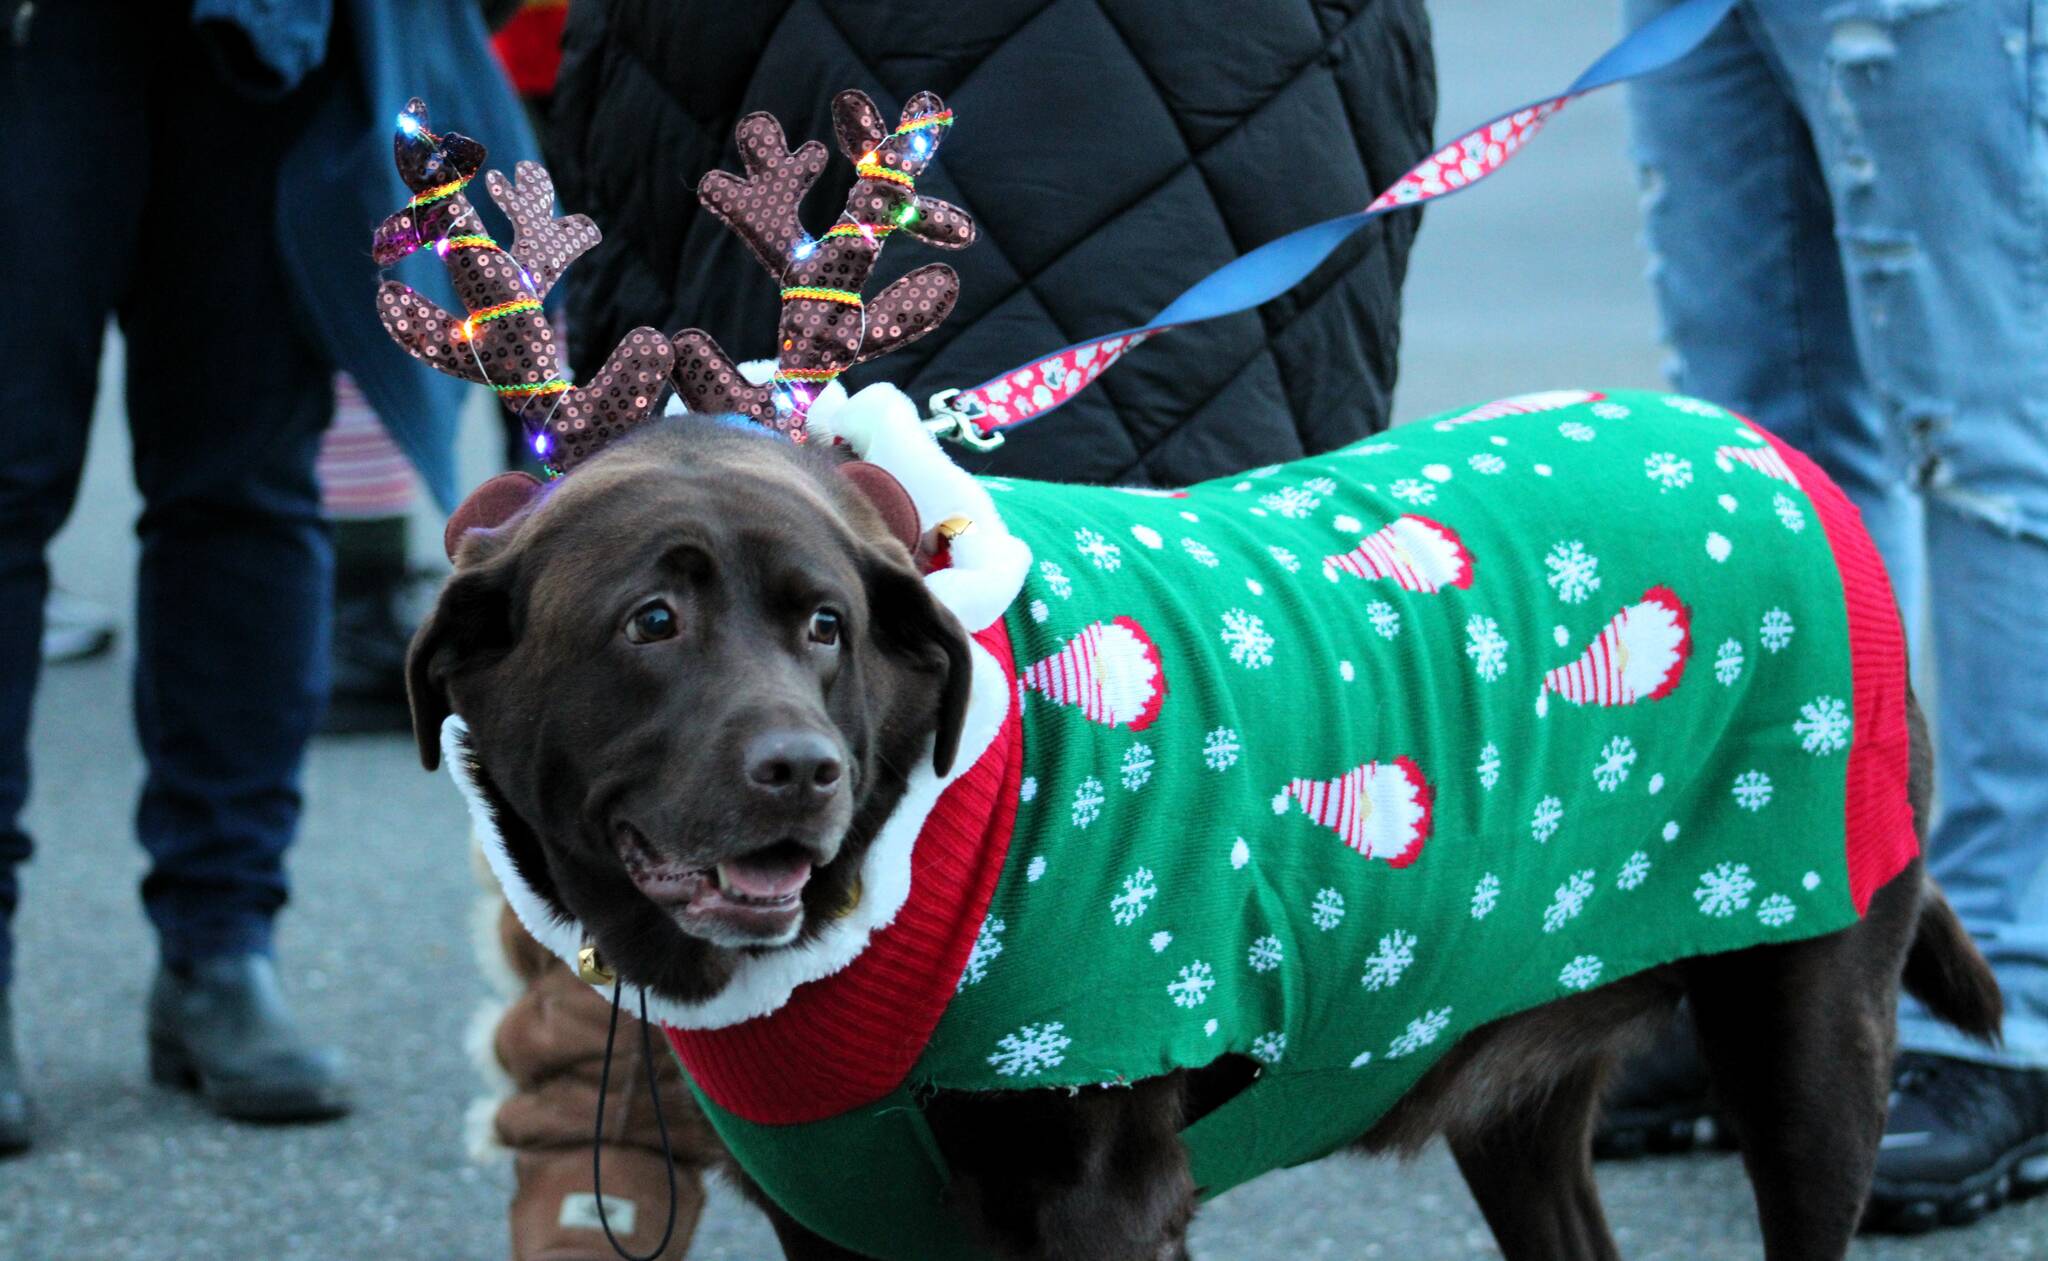 Elisha Meyer/Kitsap News Group Photos
This pooch sports a cute reindeer costume for the annual parade.